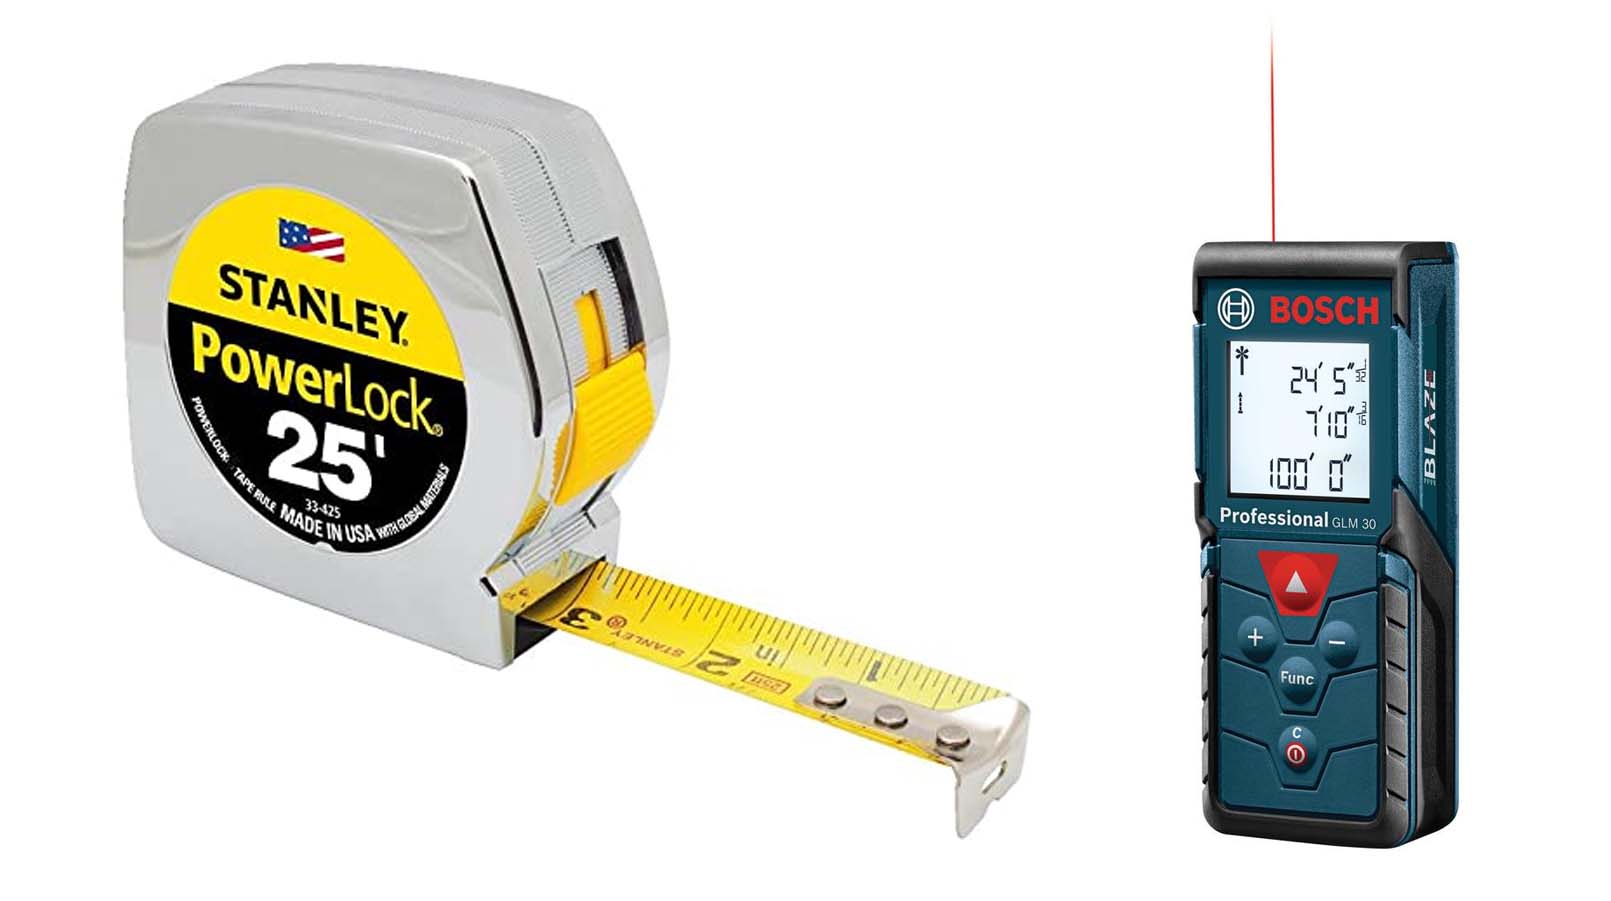 grate inlet survey guide suggested tools rulers